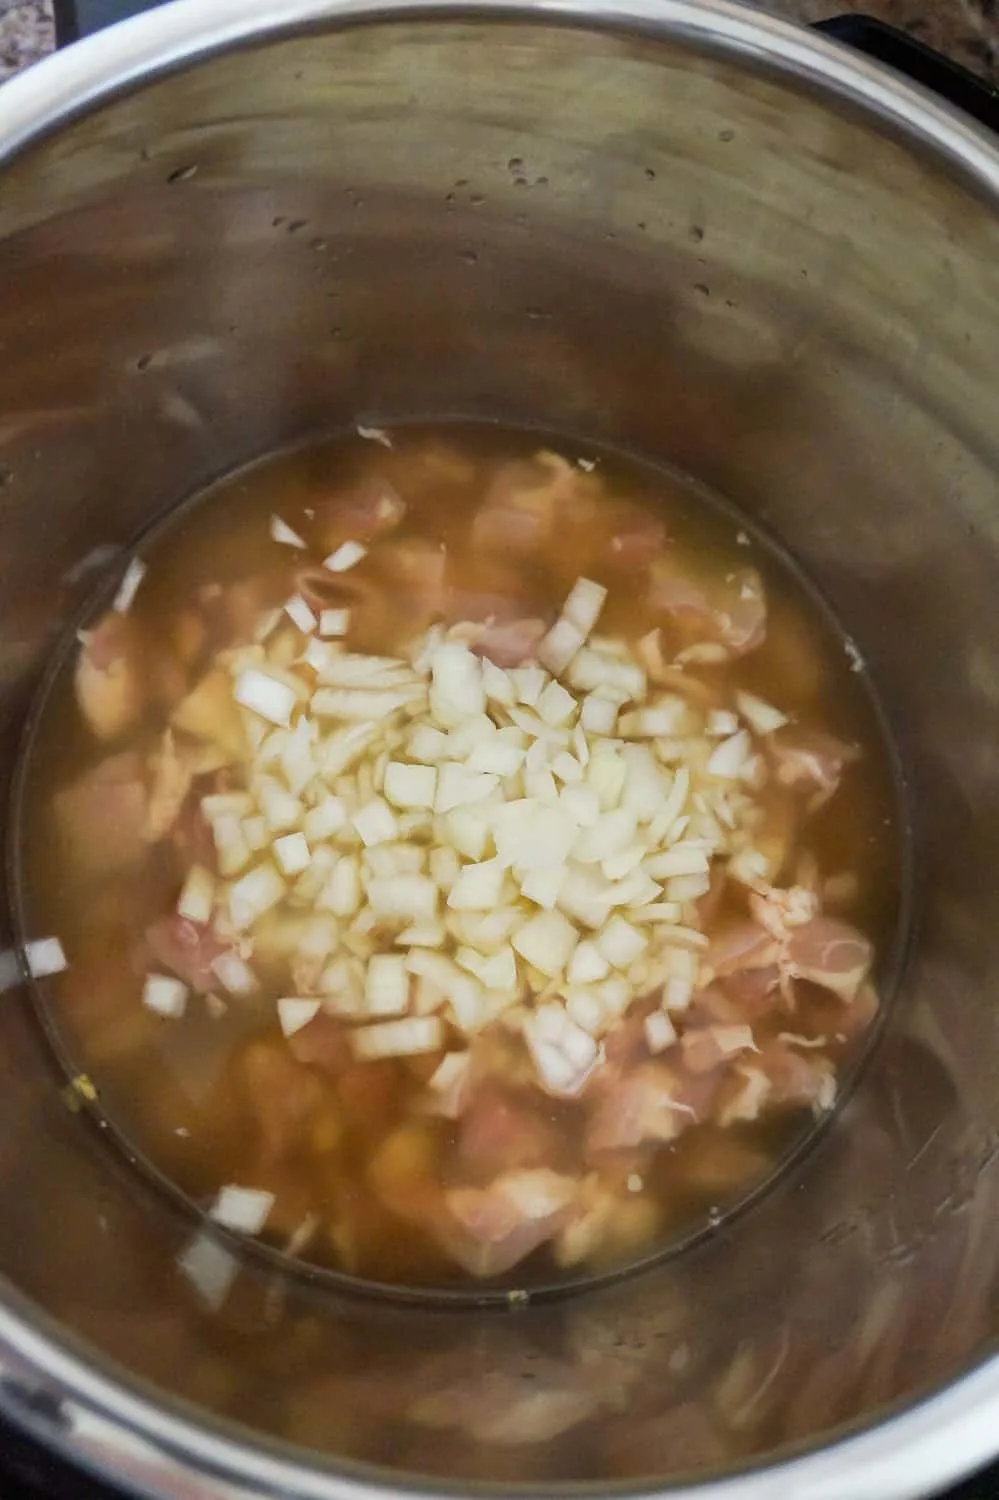 diced onions and chunks of chicken in chicken broth in an Instant Pot